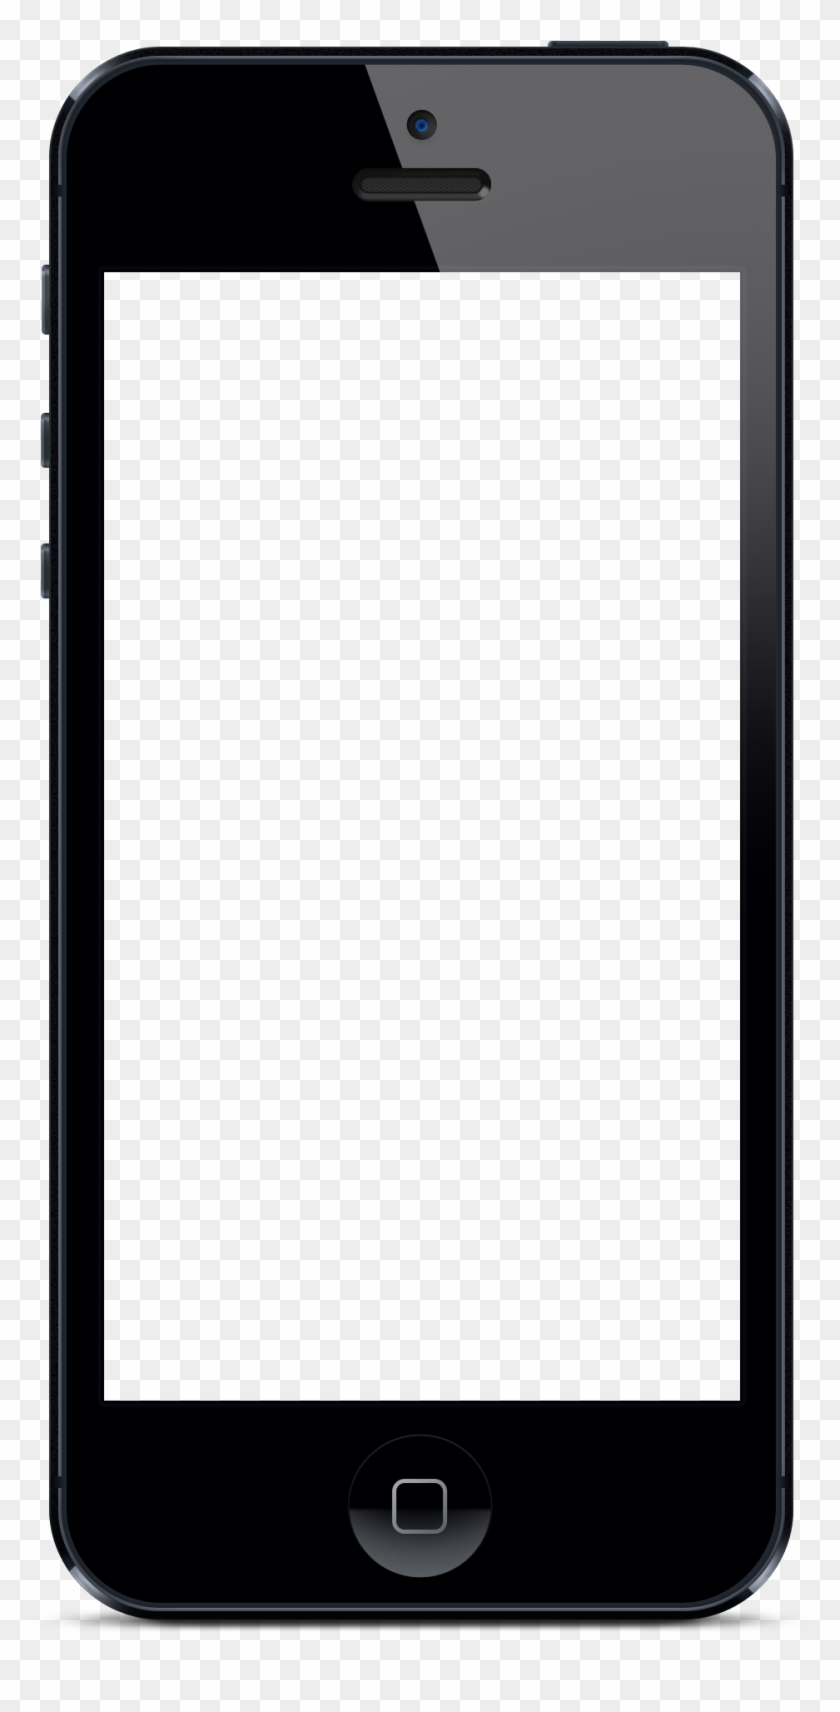 Apple Iphone Transparent Png Image - Phone Png #473413